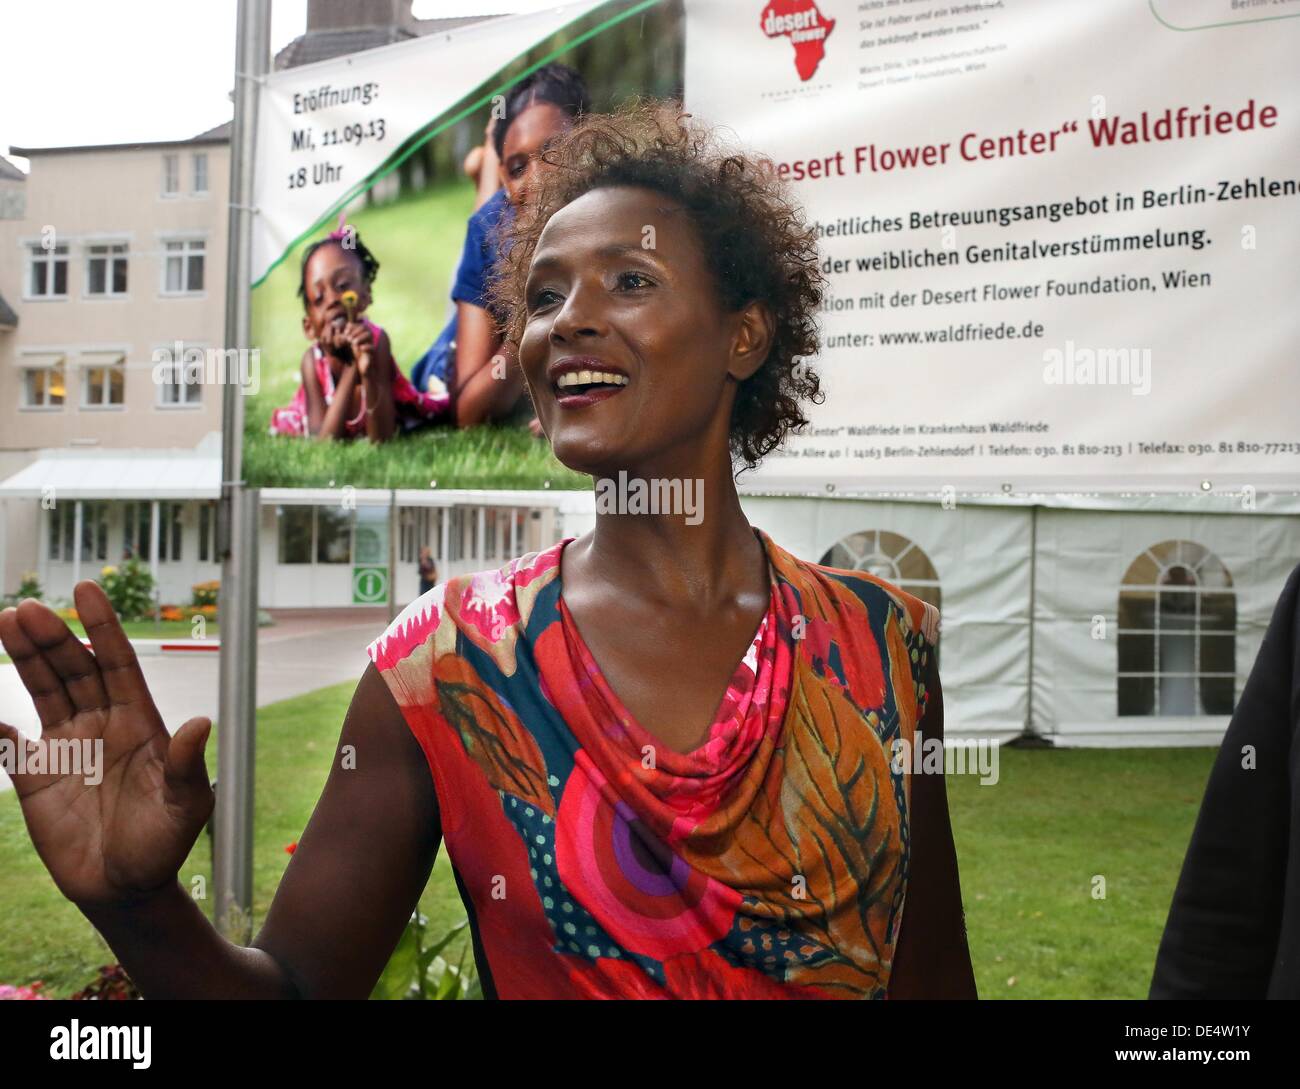 Berlin, Germany. 11th Sep, 2013. Waris Dirie, Somalian author of the bestseller 'Forest Flower' and activist against female genital cutting is greeted at the opening of the 'Desert Flower Centre' of which she is a patron at hospital Waldfriede in Berlin, Germany, 11 September 2013. The centre is the first hospital in Europe that treats women with femal gentical cutting psychologically and surgically. Photo: STEPHANIE PILICK/dpa/Alamy Live News Stock Photo